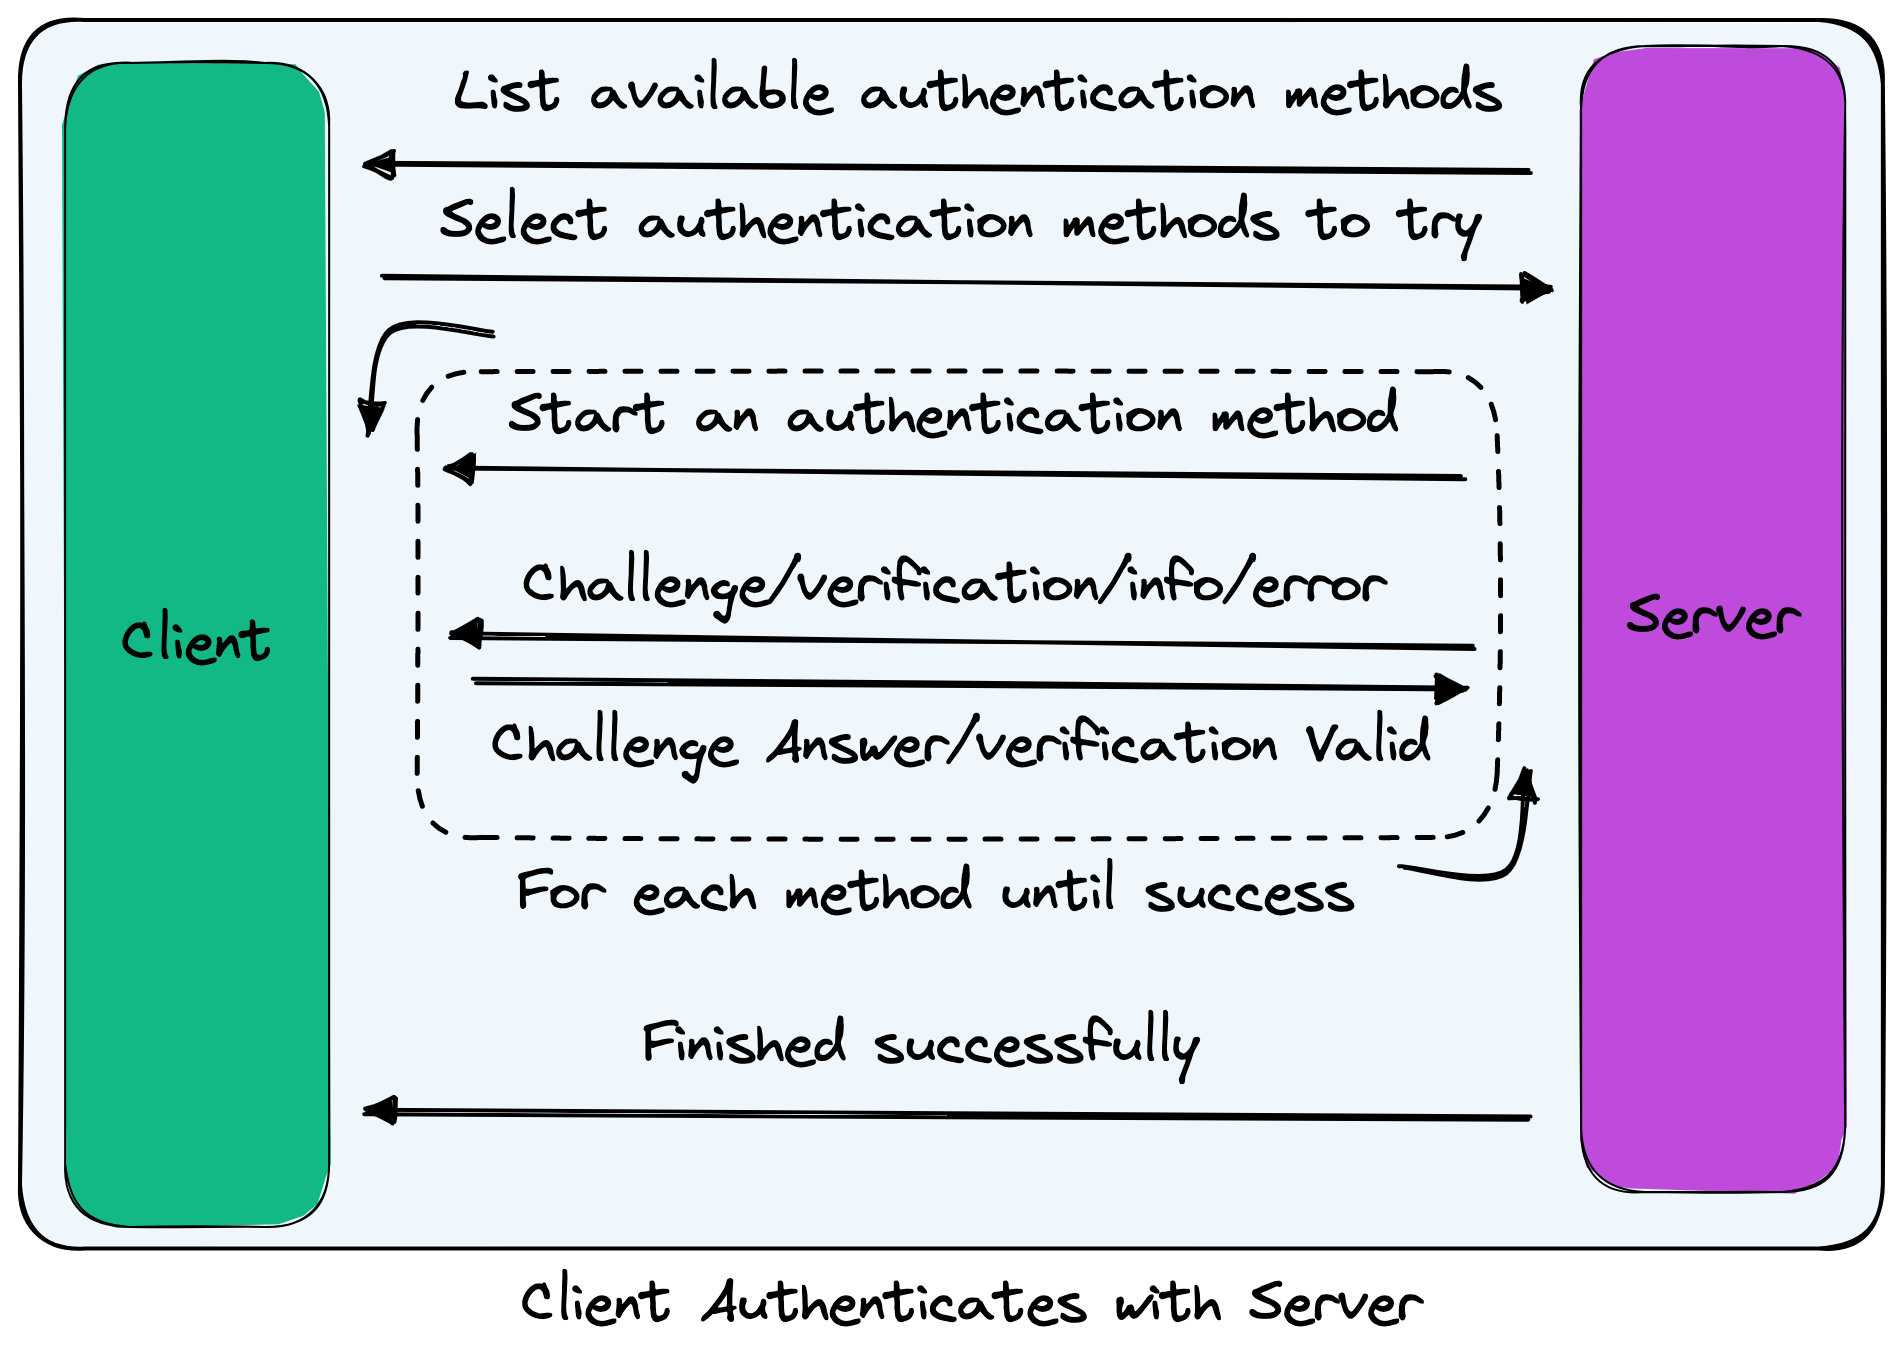 Authenticate with server